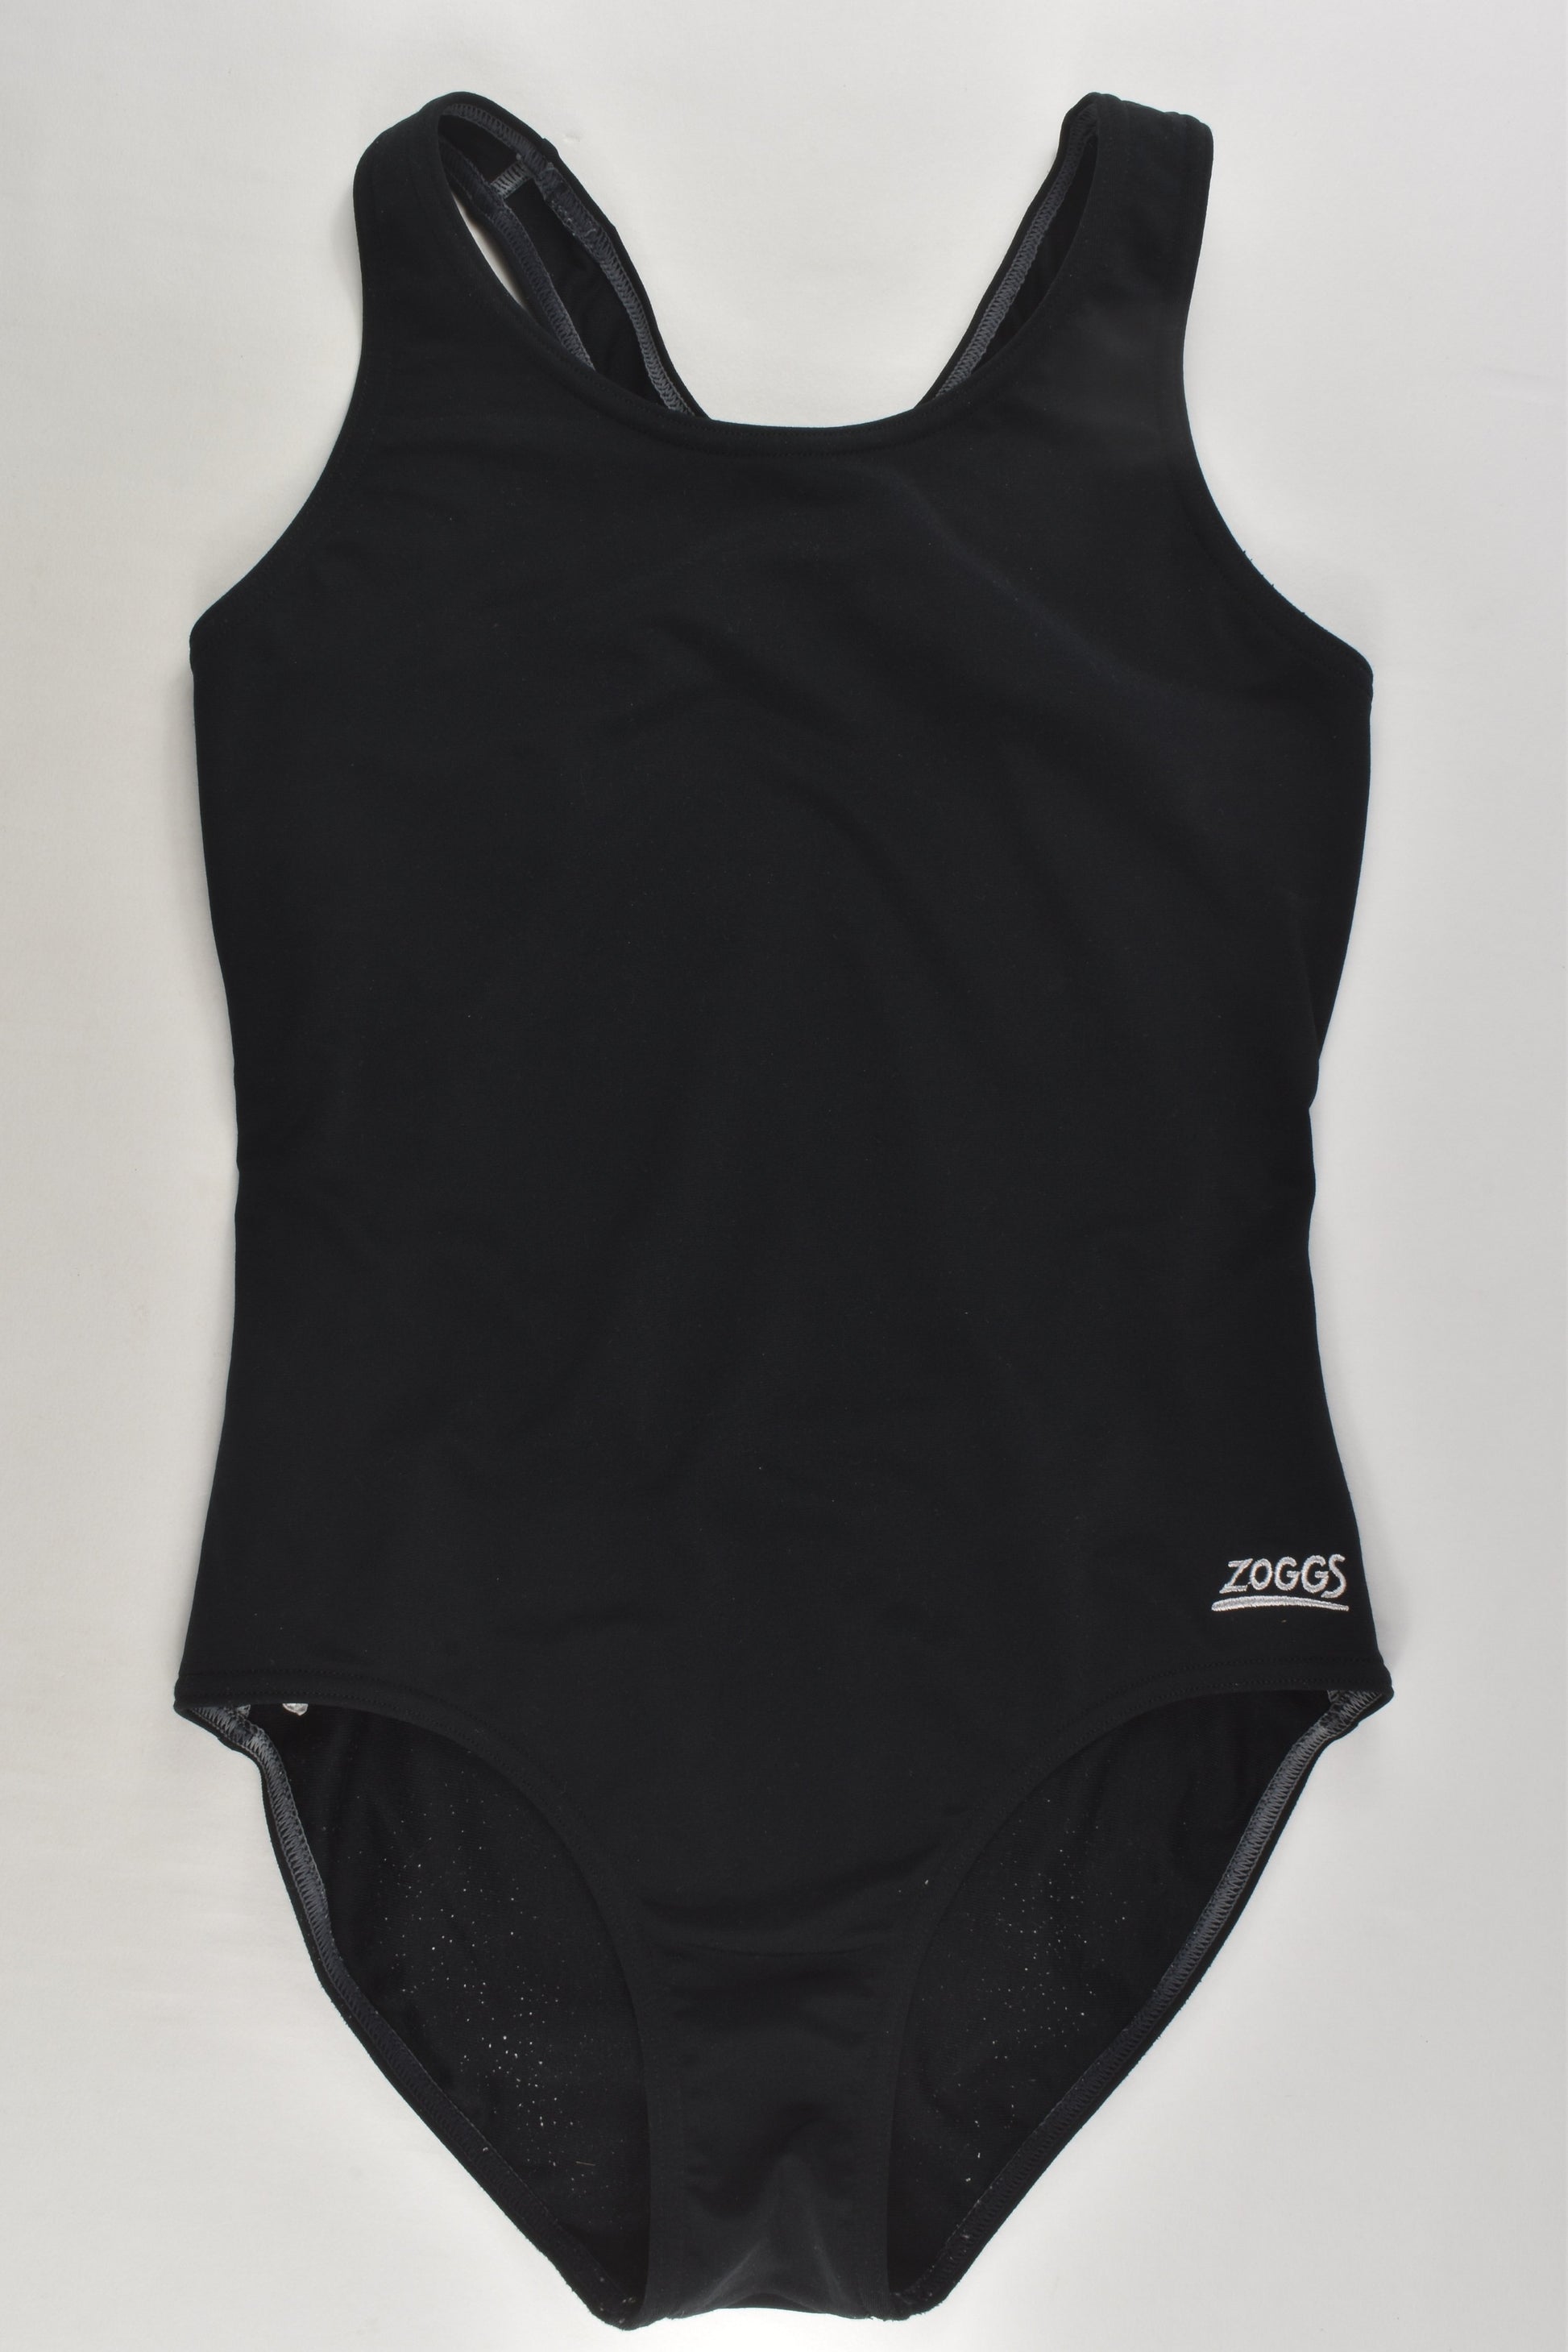 Zoggs Size 10 Bathers